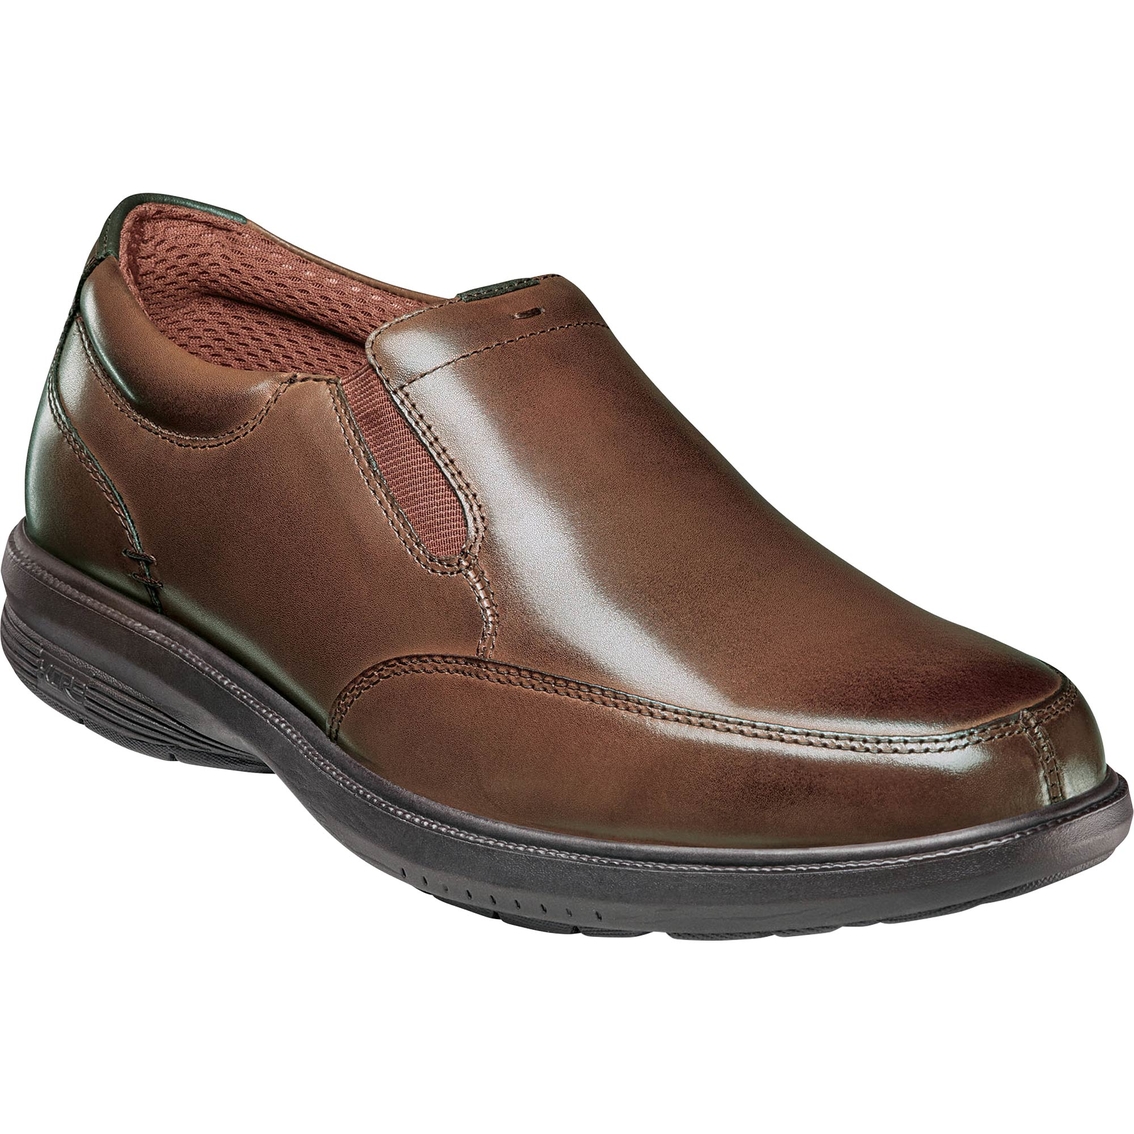 Nunn Bush Myles Street Slip On Moccasin Toe Shoes | Casuals | Shoes ...